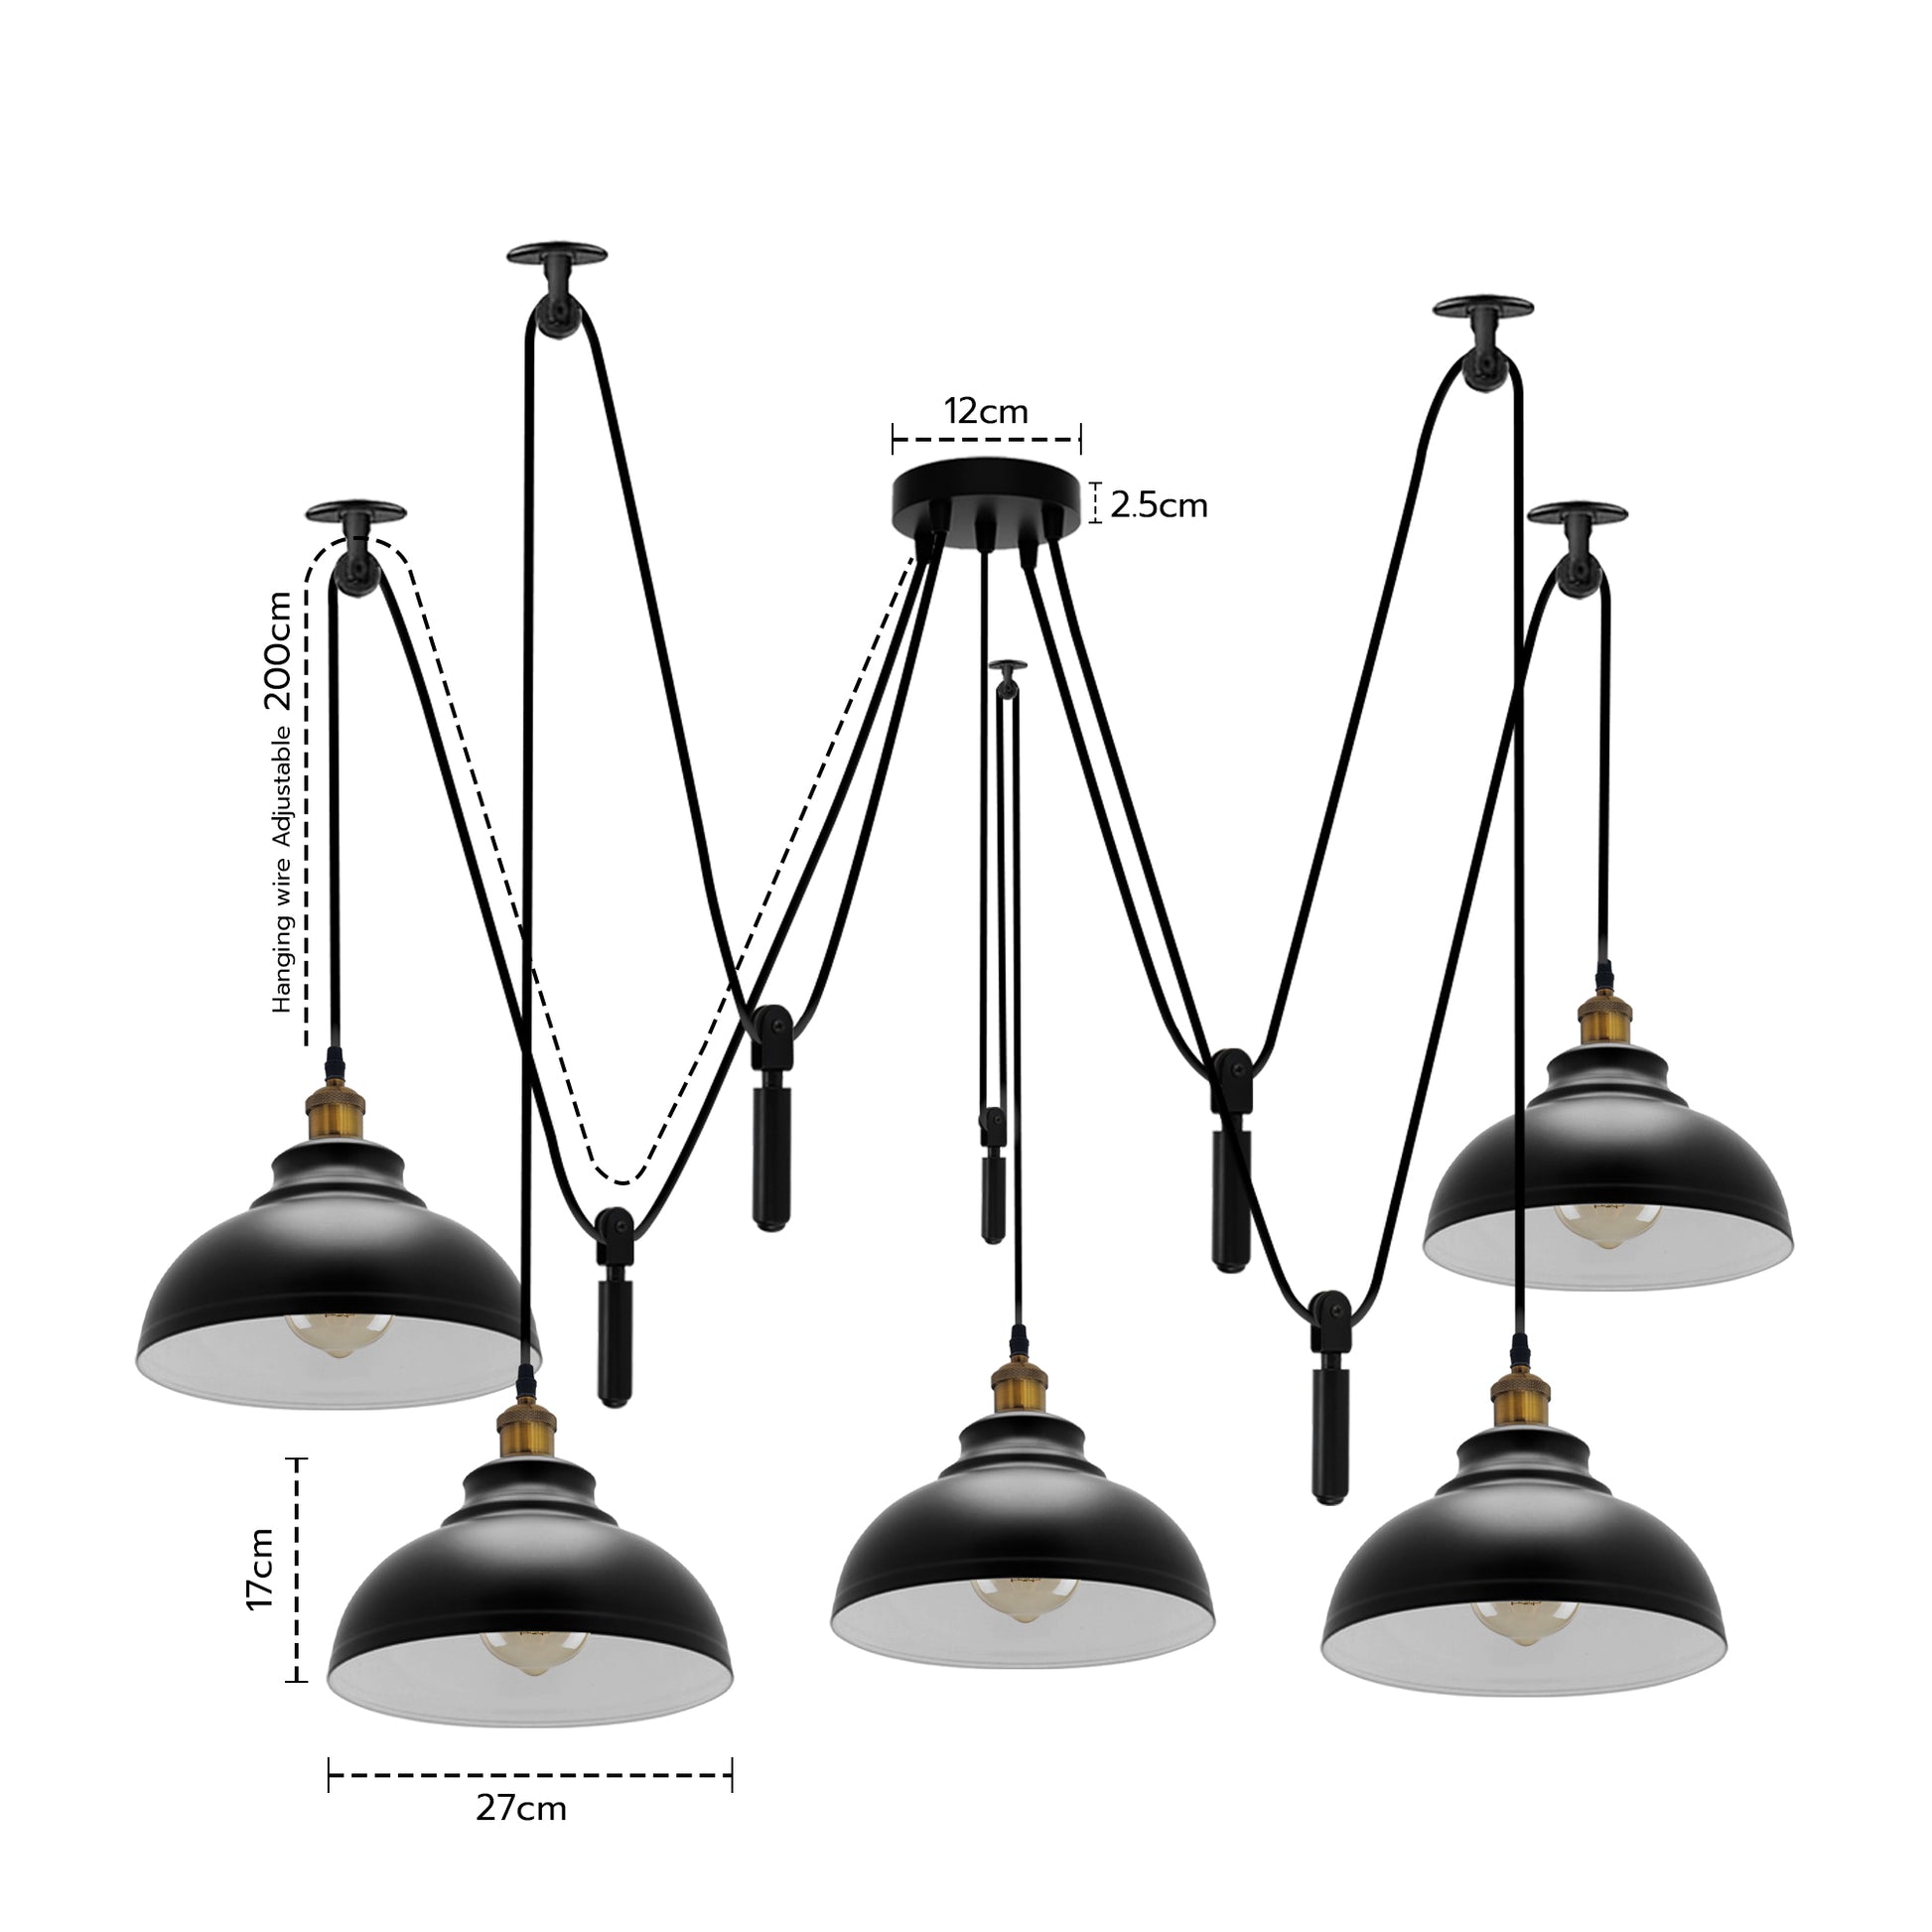  Dome Shade Ceiling Pendant Light - Size image